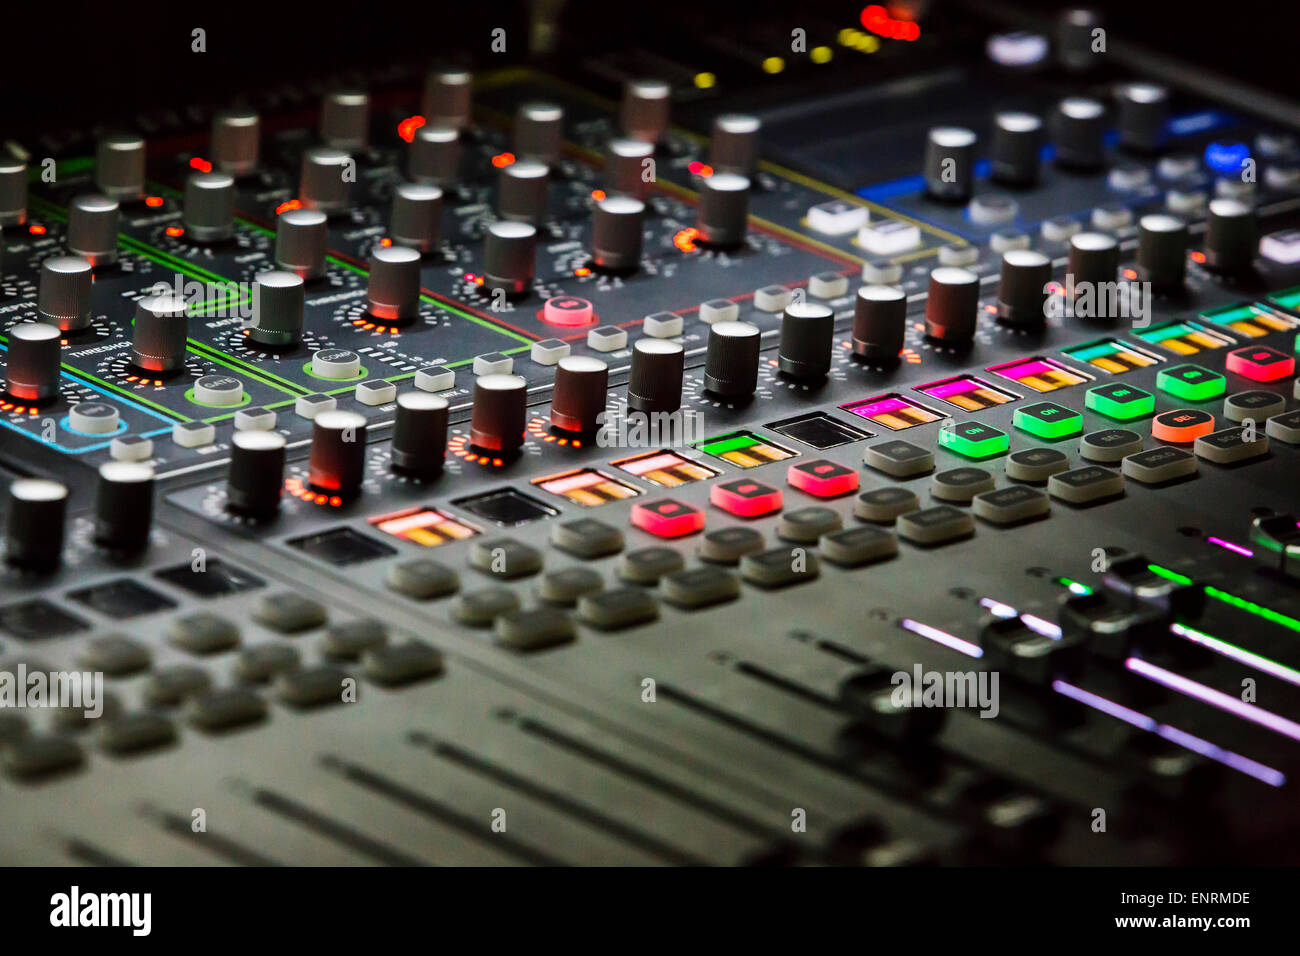 Audio mixer mixing board fader and knobs with selective focus central buttons, Music mixing console with backlit buttons Stock Photo - Alamy